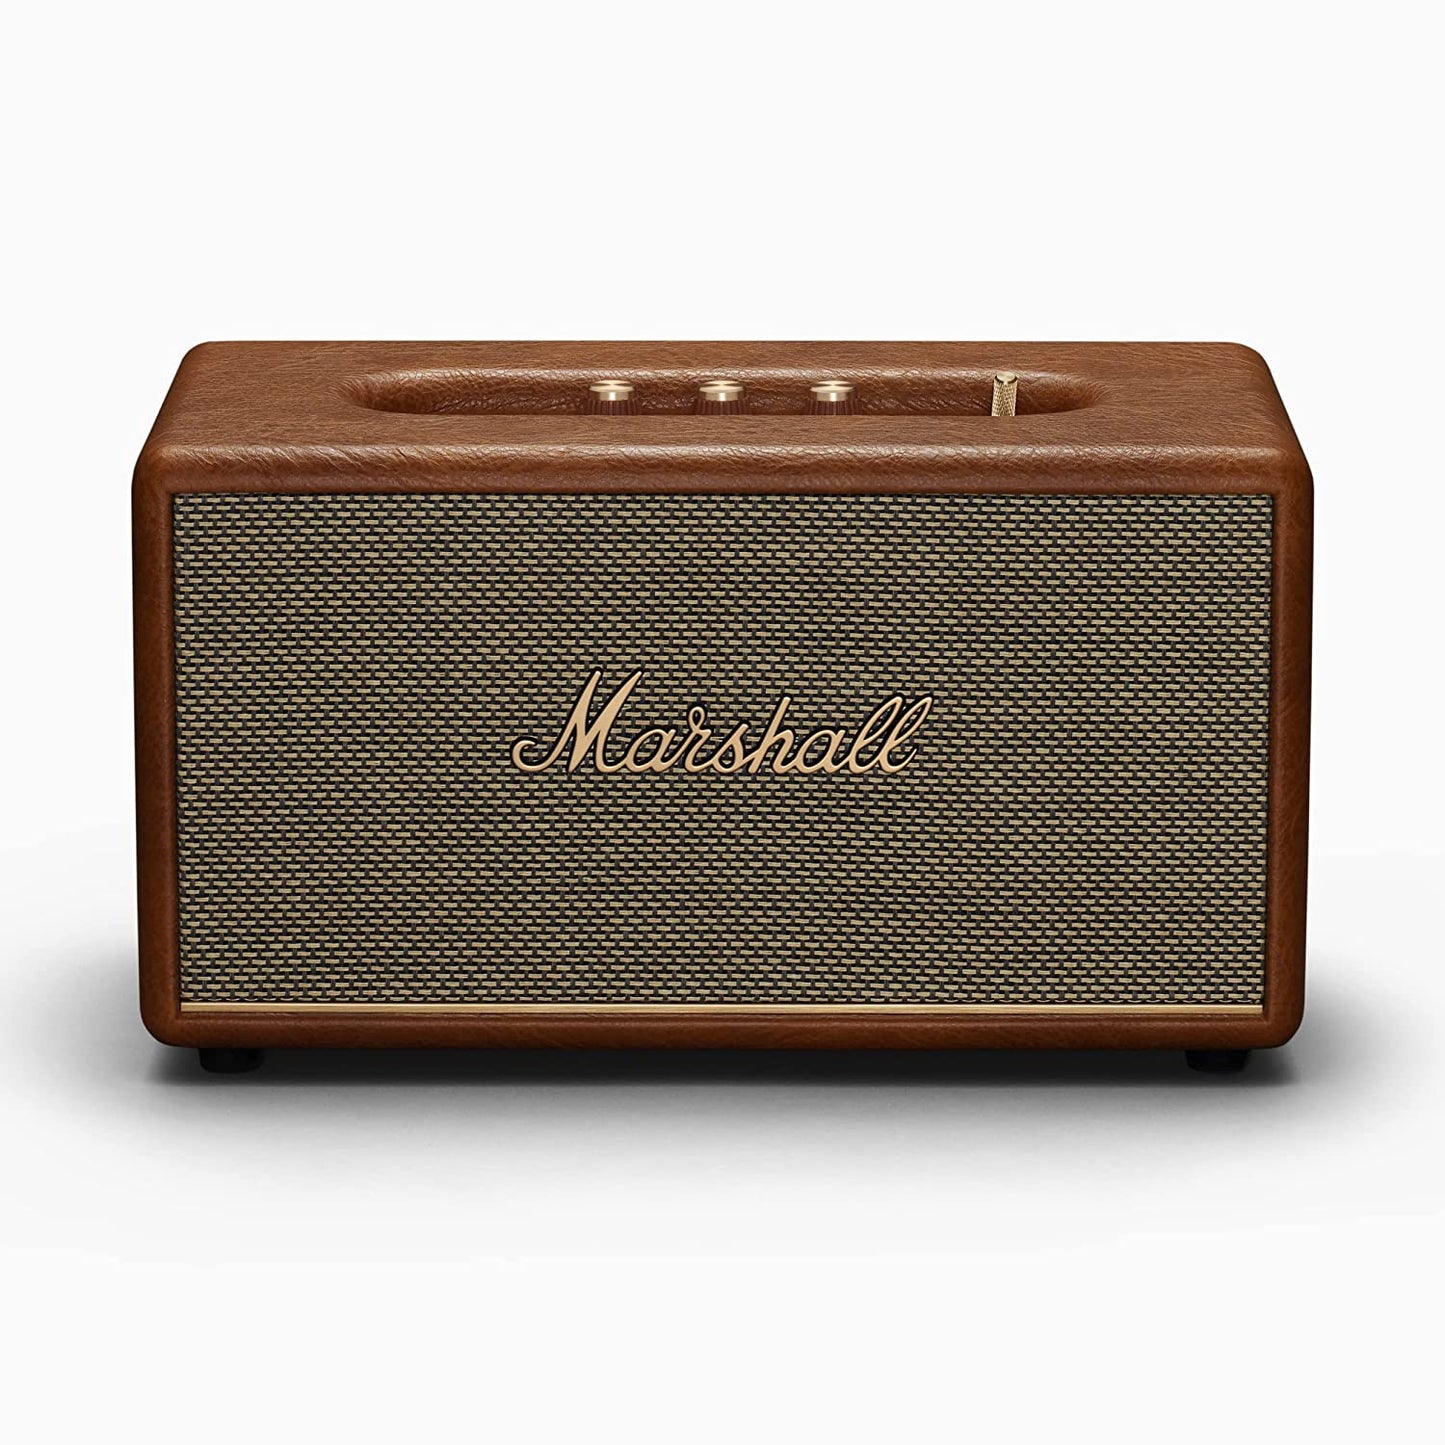 Marshall Stanmore lll - Brown